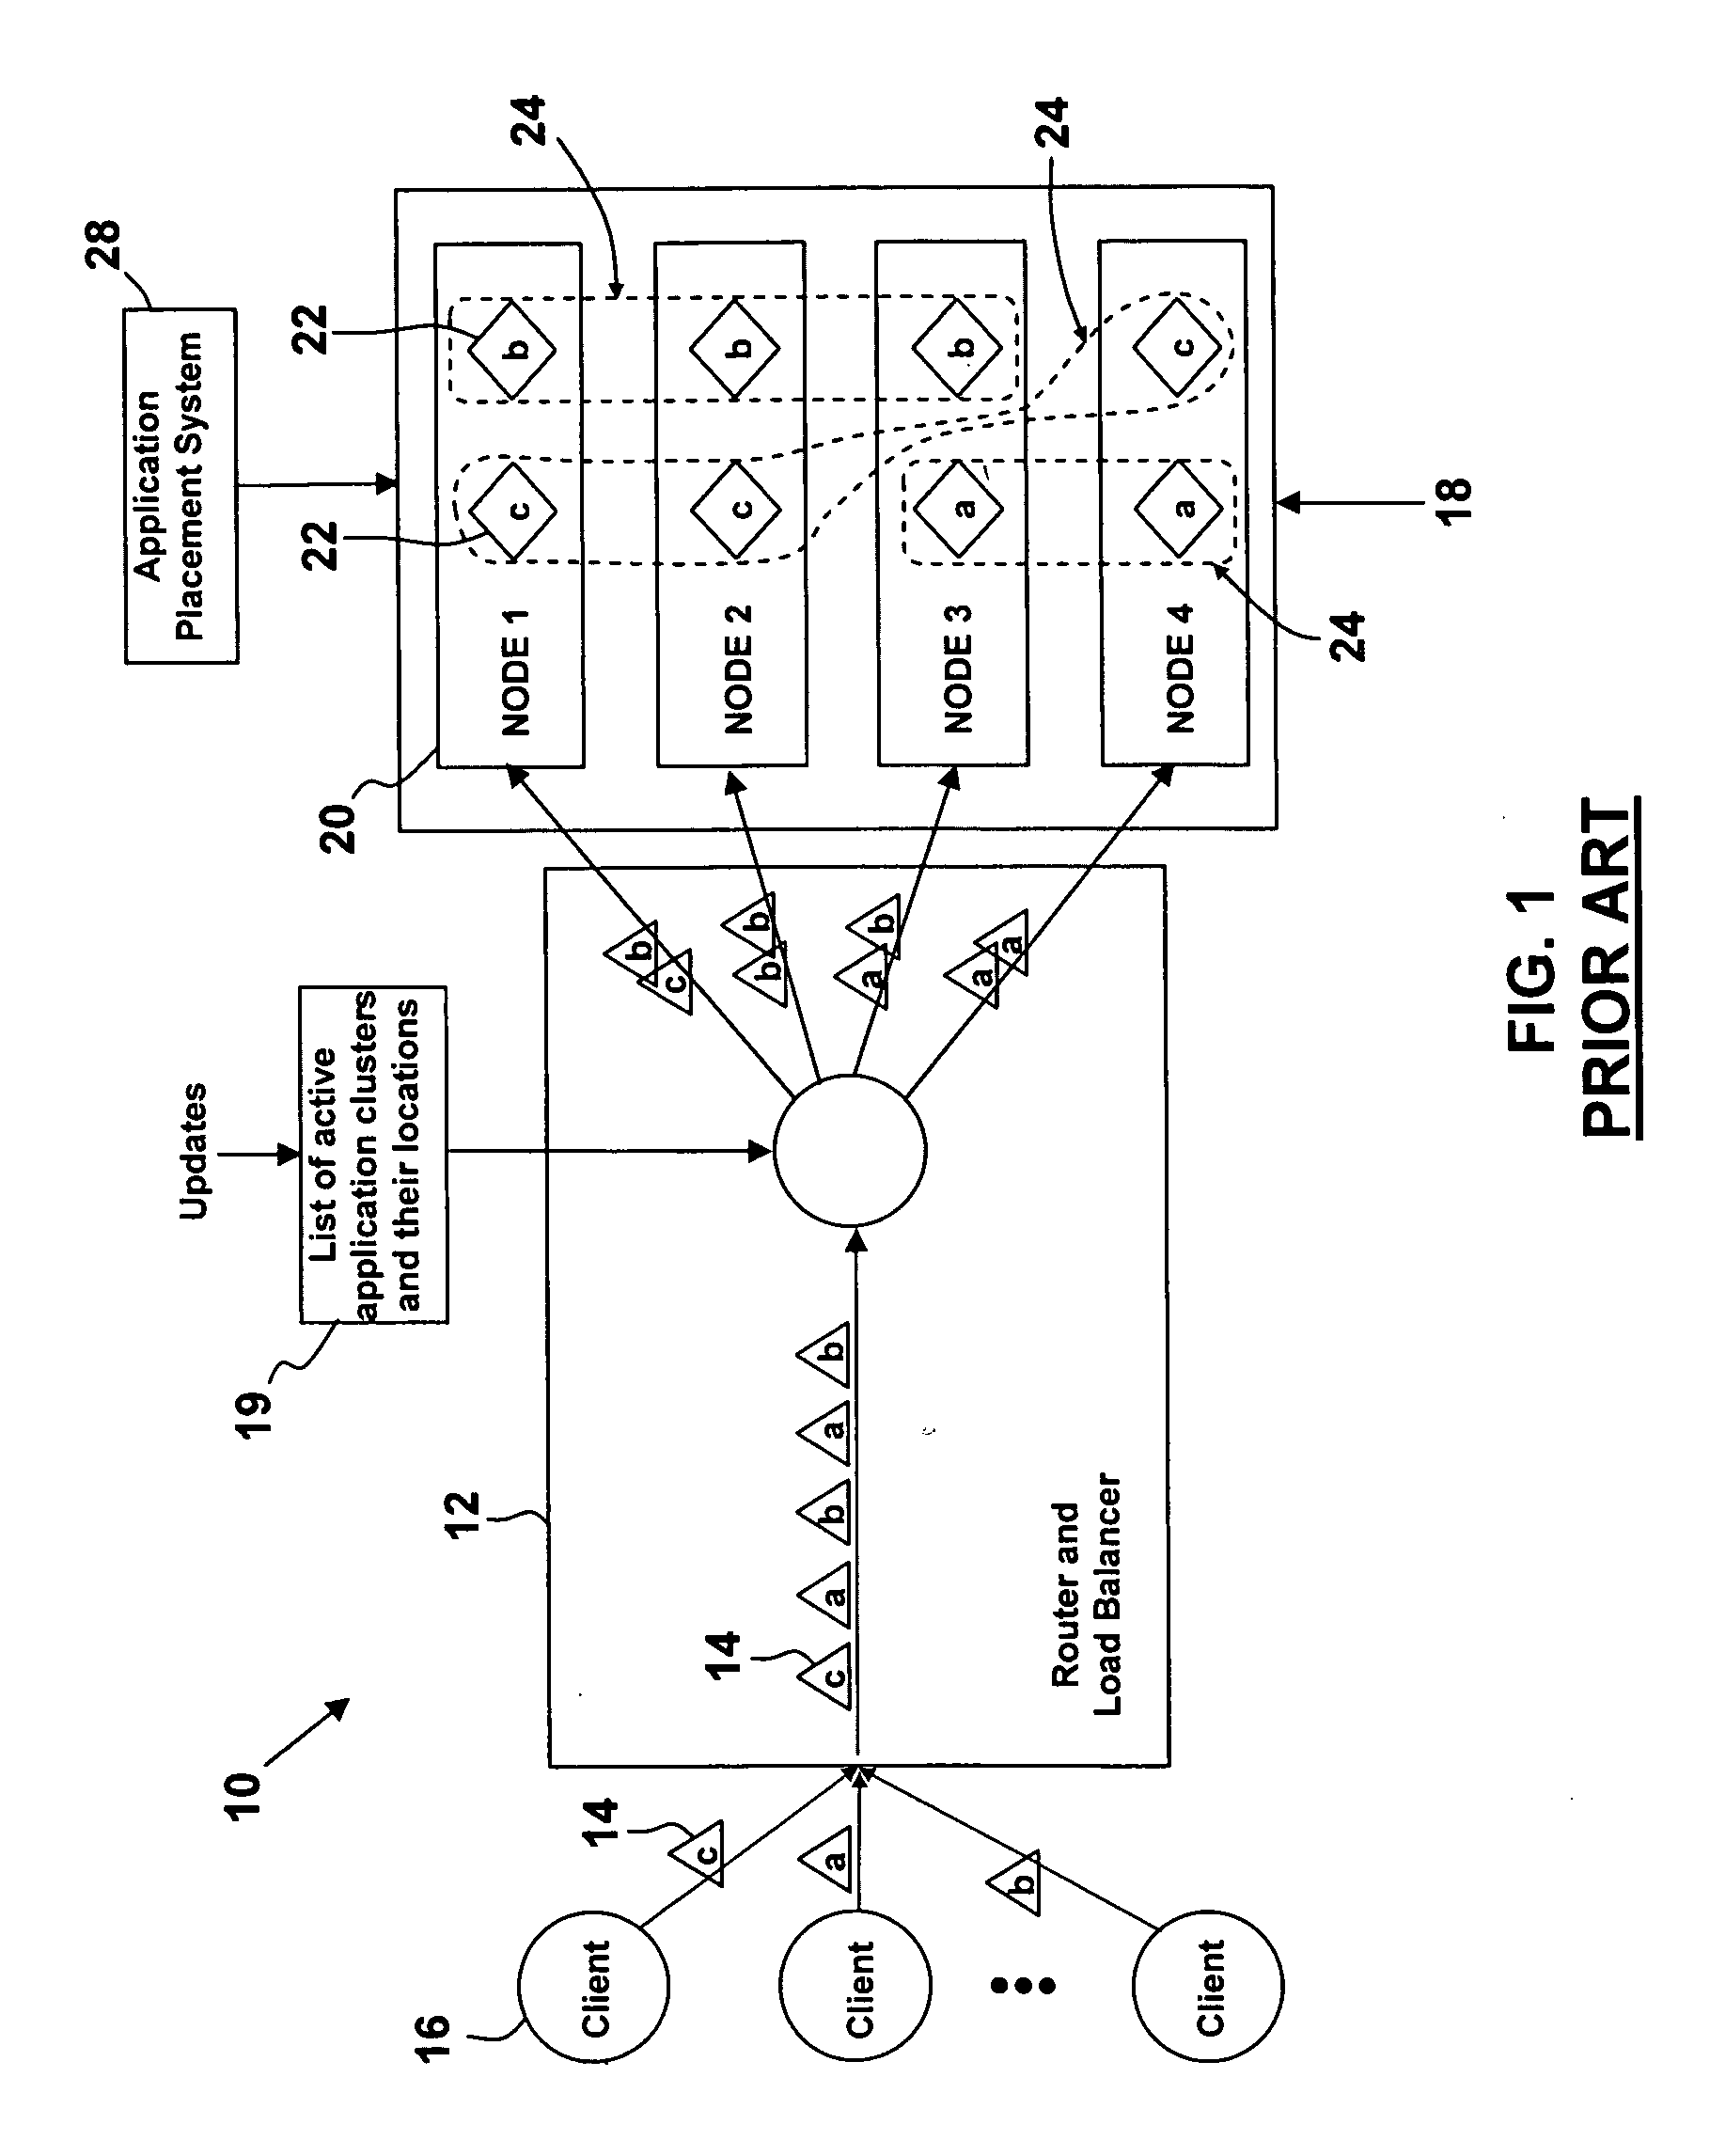 Method, system, and computer program product for supporting a large number of intermittently used application clusters